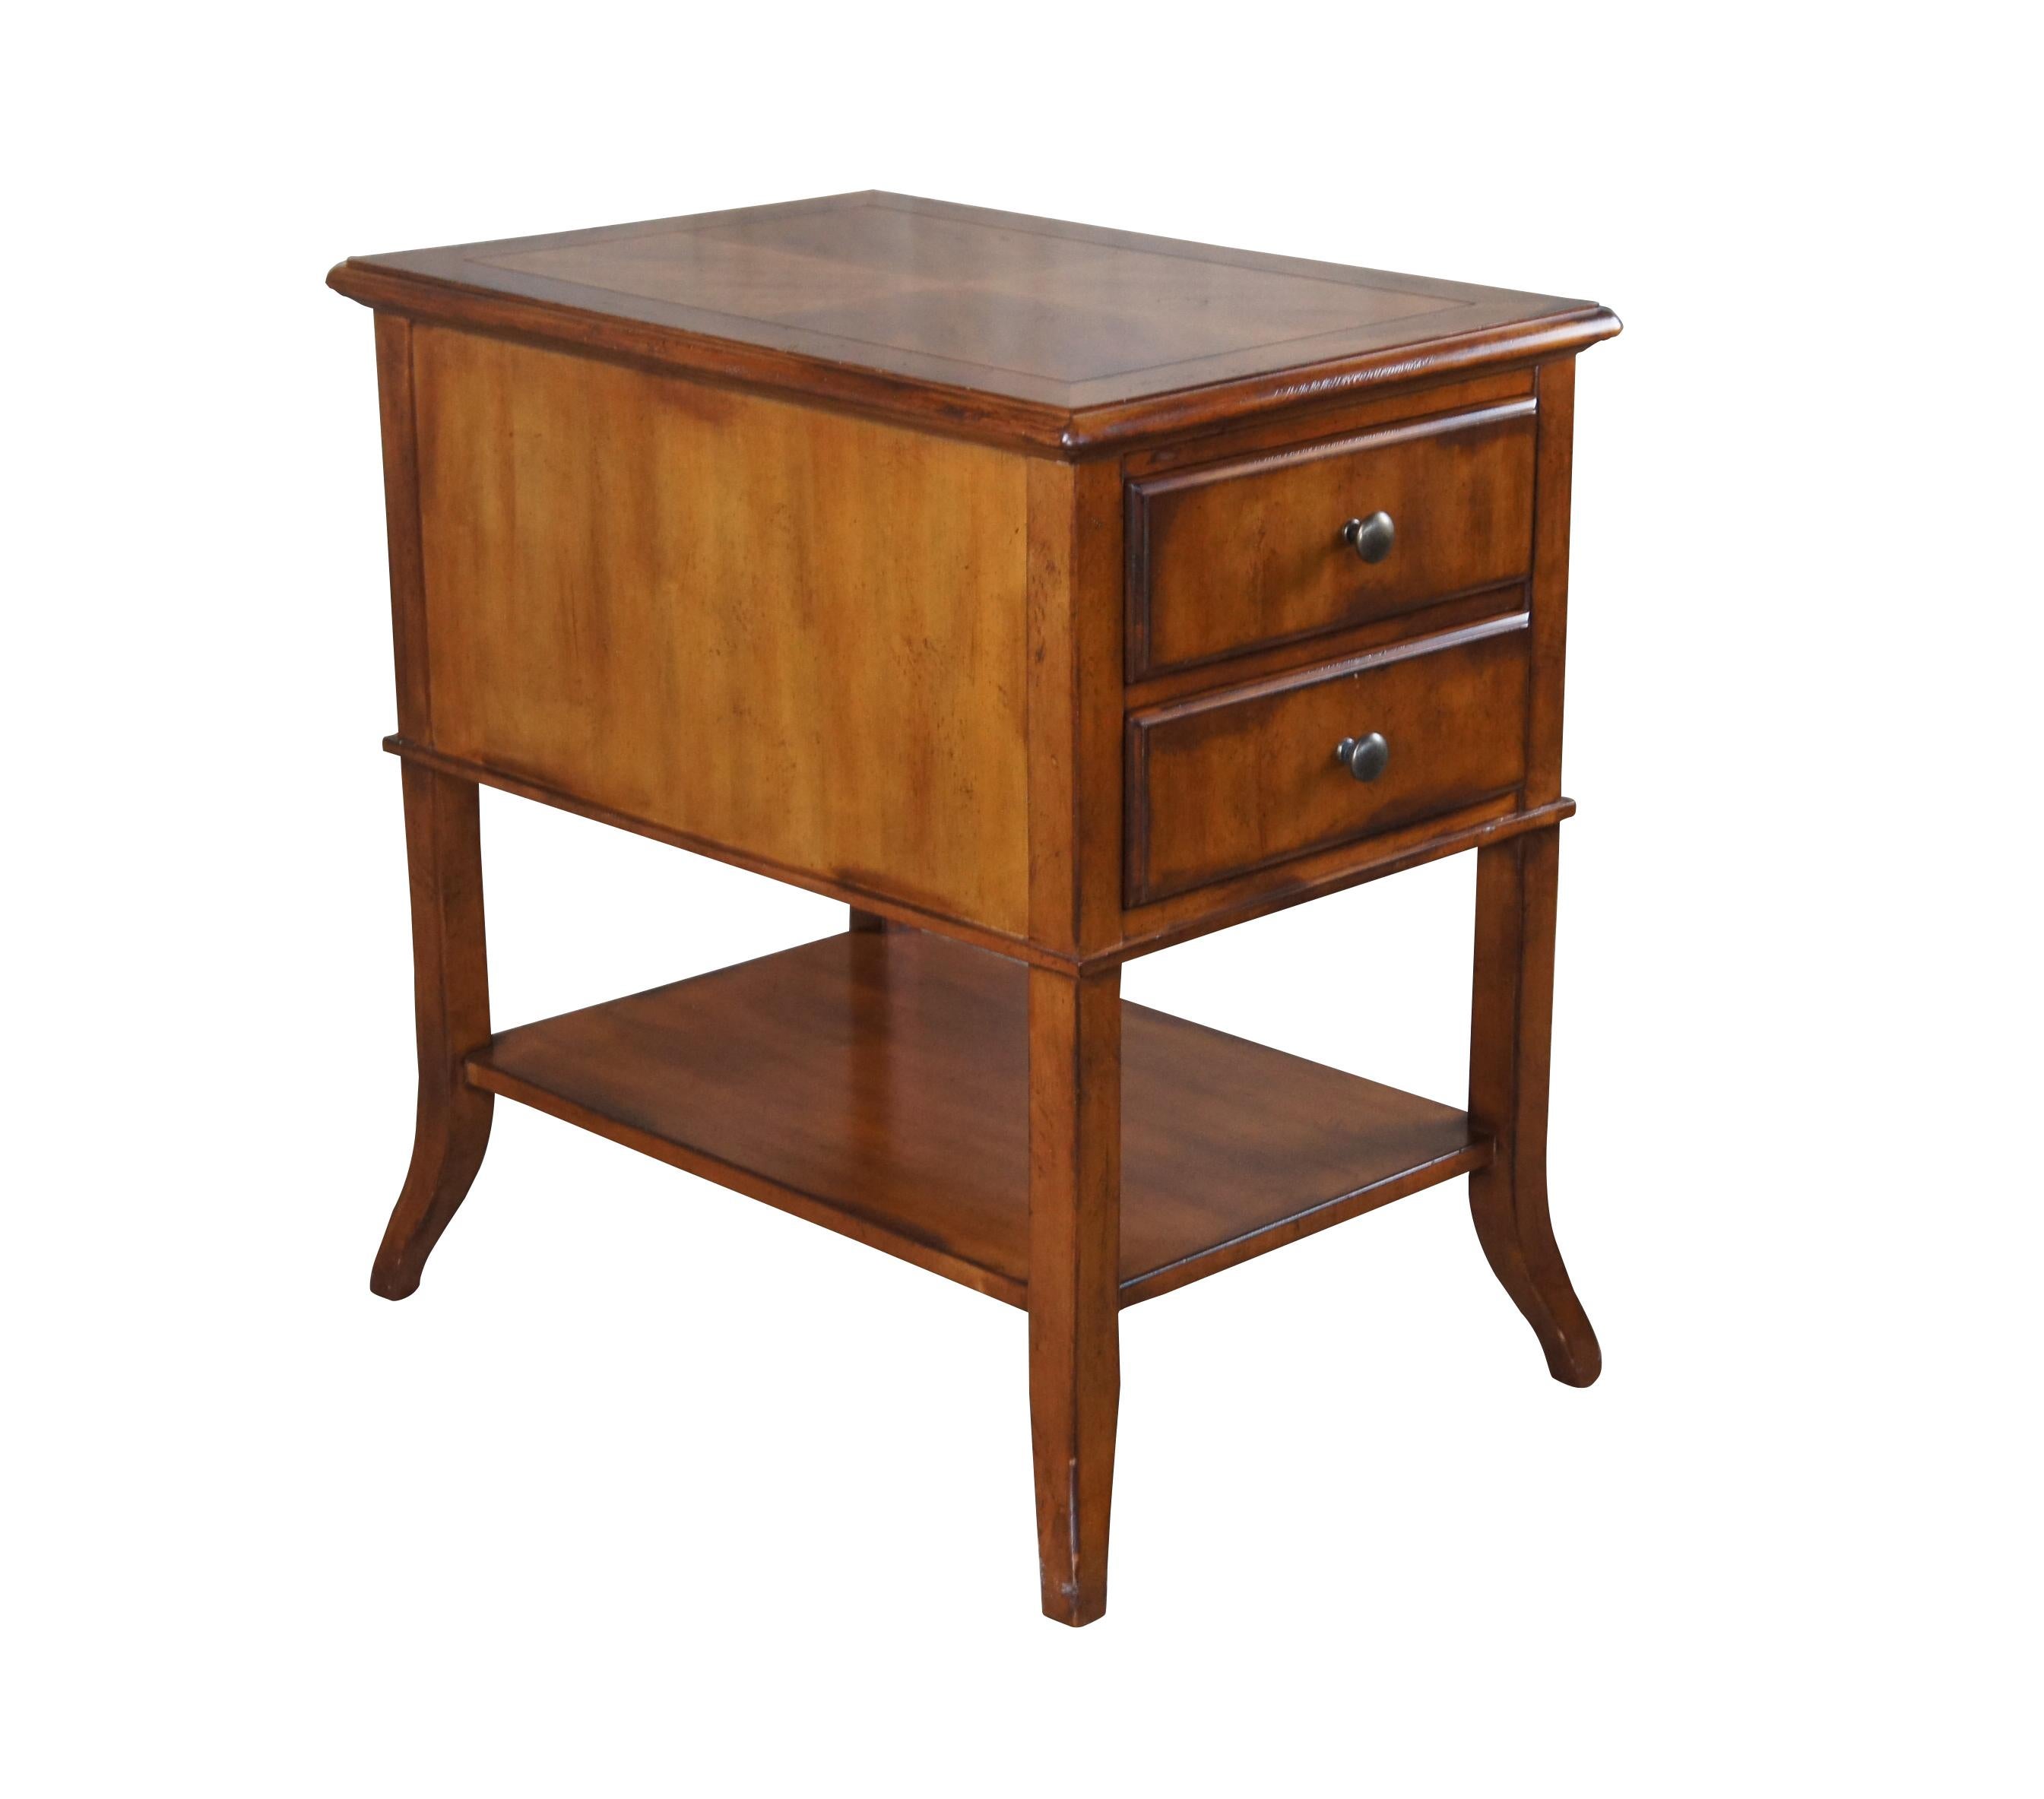 Vintage CTH Sherrill Occasional table featuring a tiered rectangular design with lower shelf, two drawers and flared legs.

Dimensions:
26.5